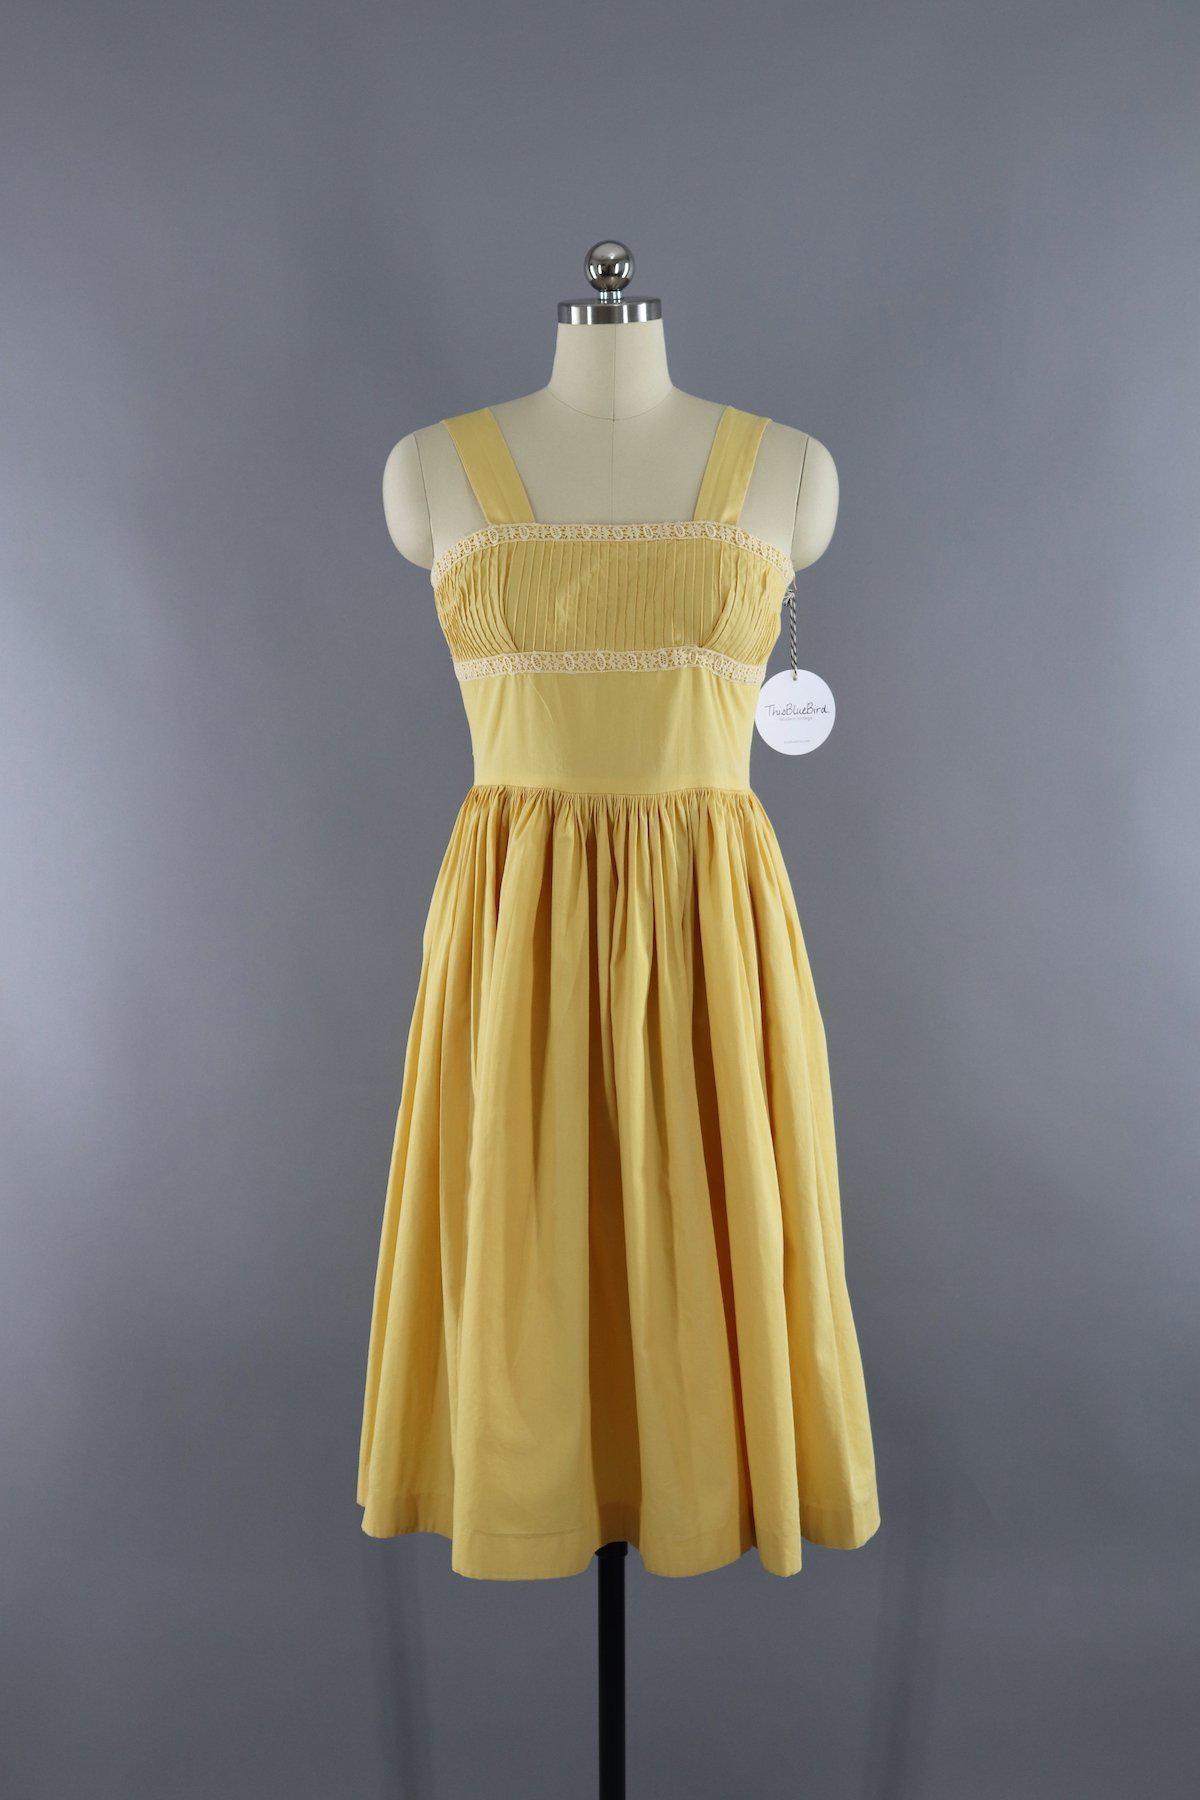 Vintage 1950s Yellow Cotton Dress and Blouse Set - ThisBlueBird